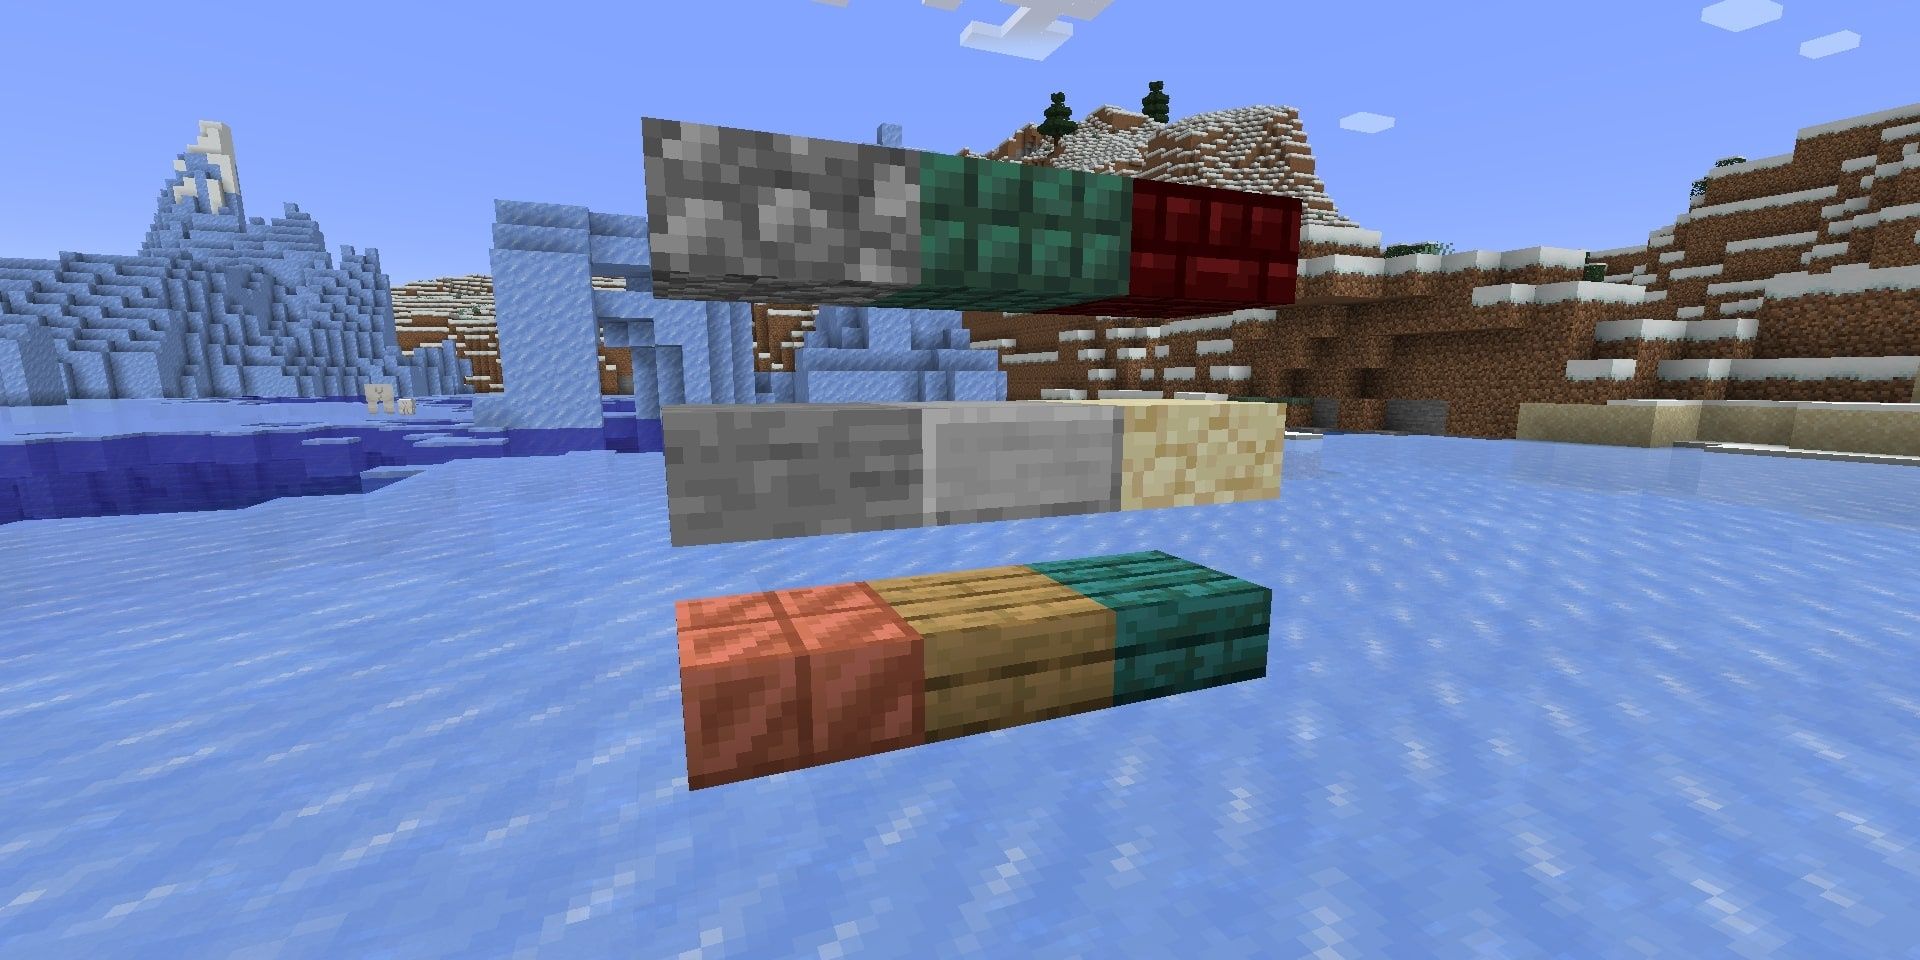 Some of the slabs in Minecraft